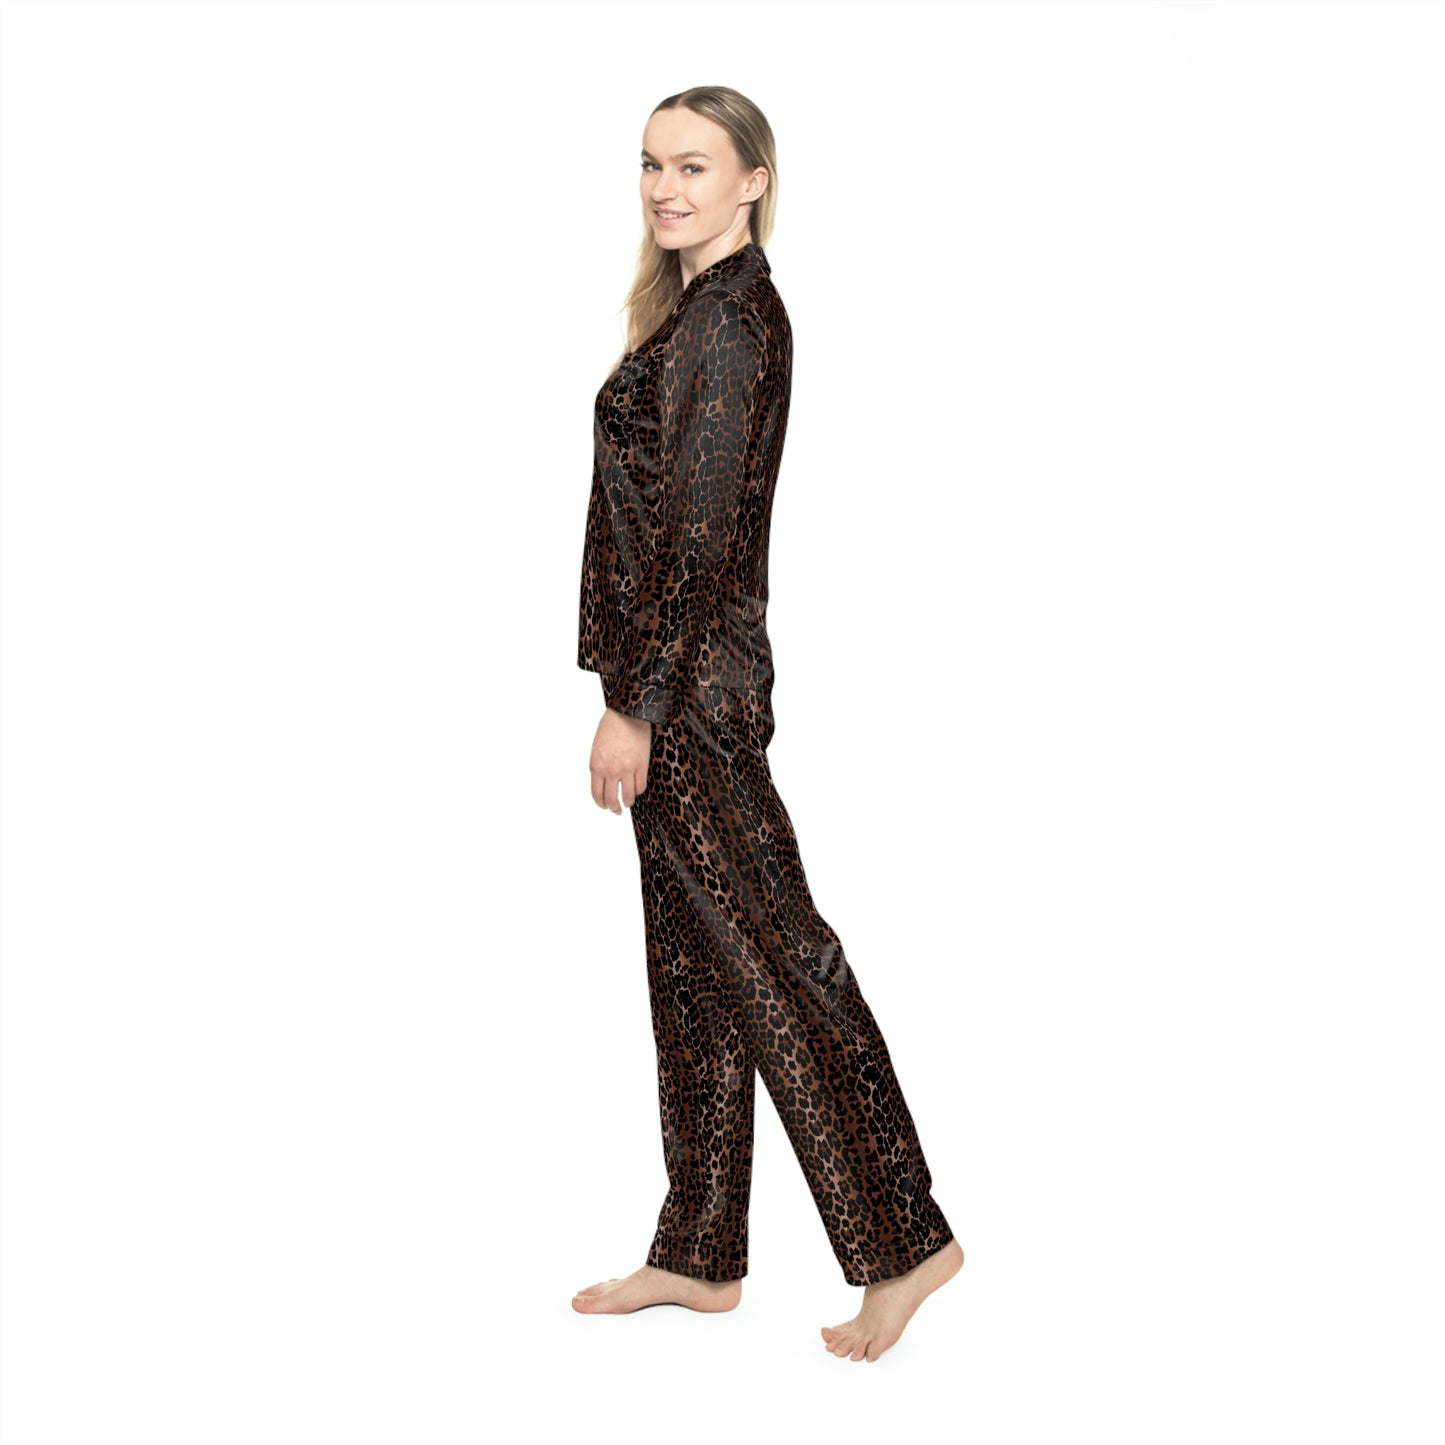 Pajama Game in OG Leopard Satin 2 Piece Button Up PJ Set | Pinup Couture Relaxed